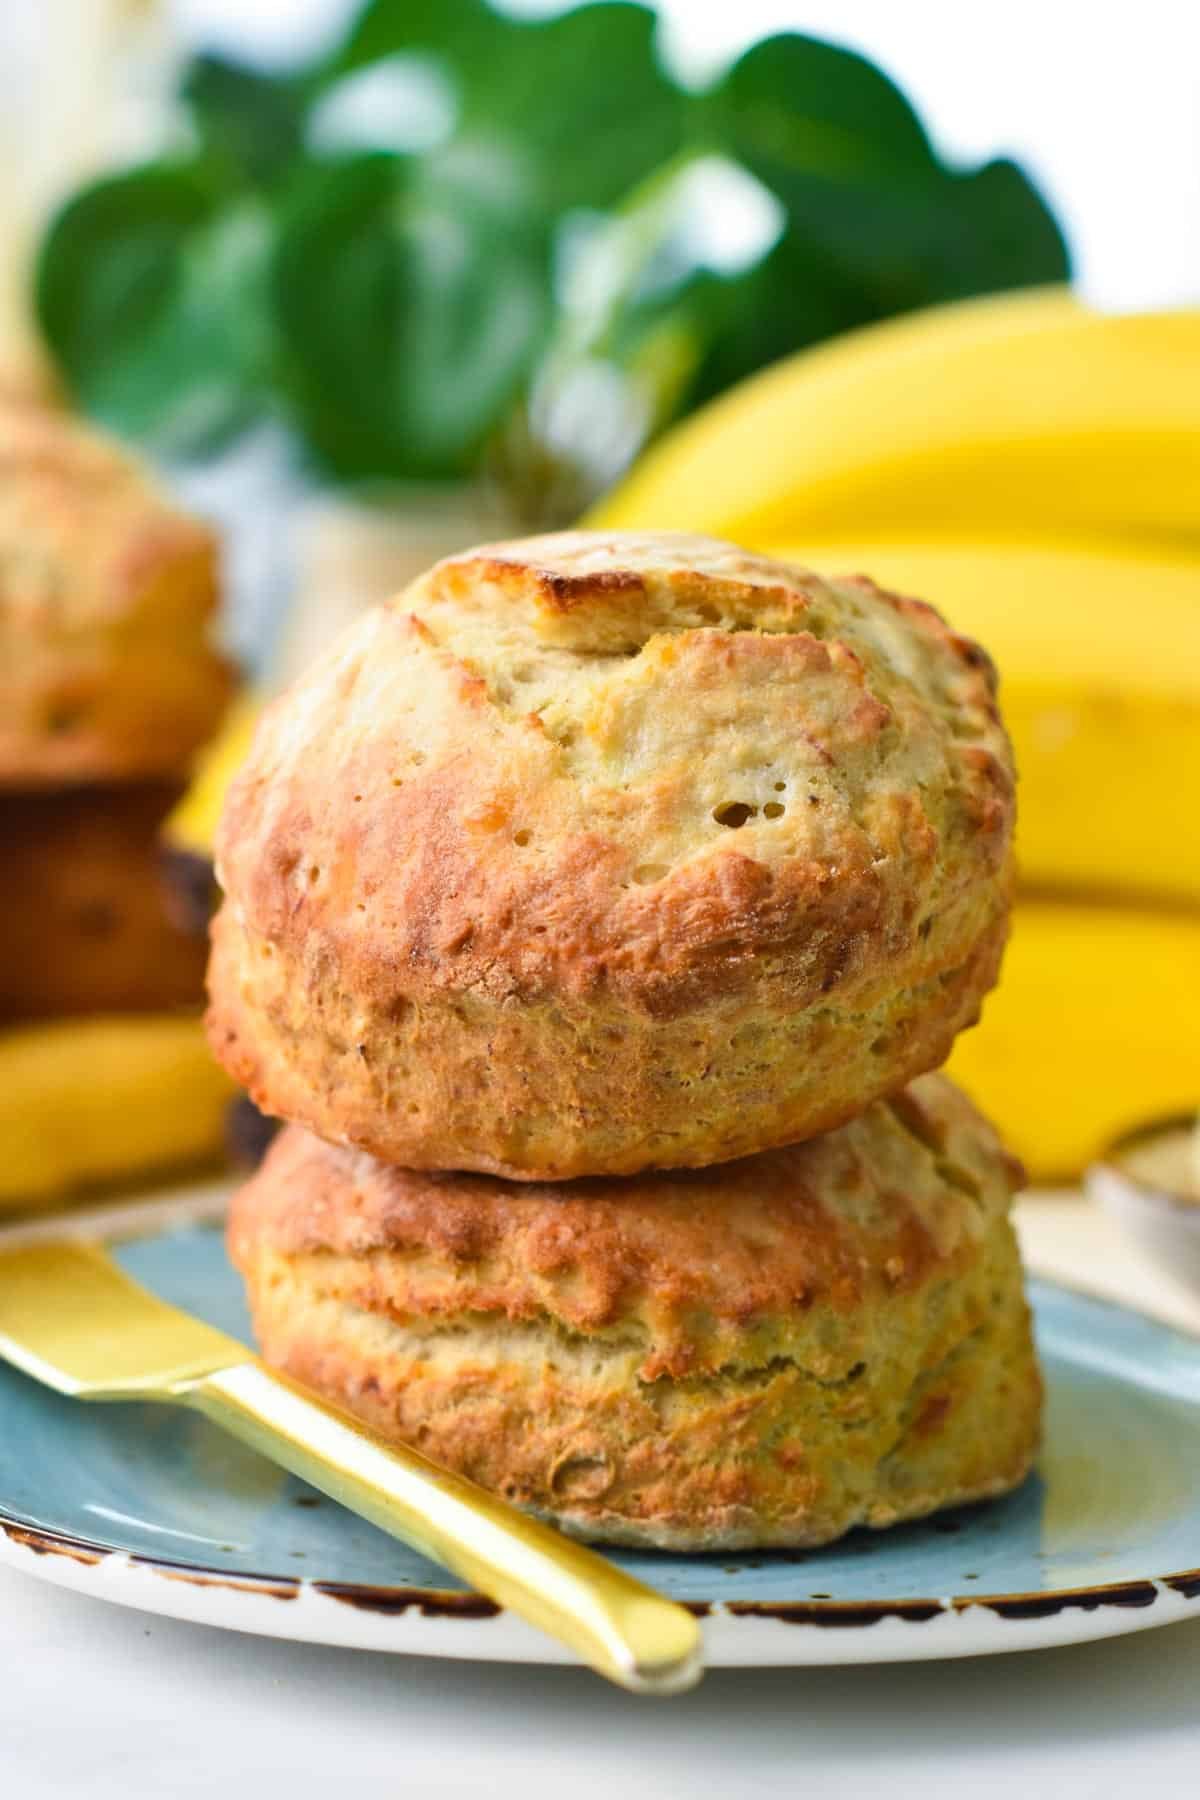 two bananas scones stacked, on a blue plate and a yellow knife on side.